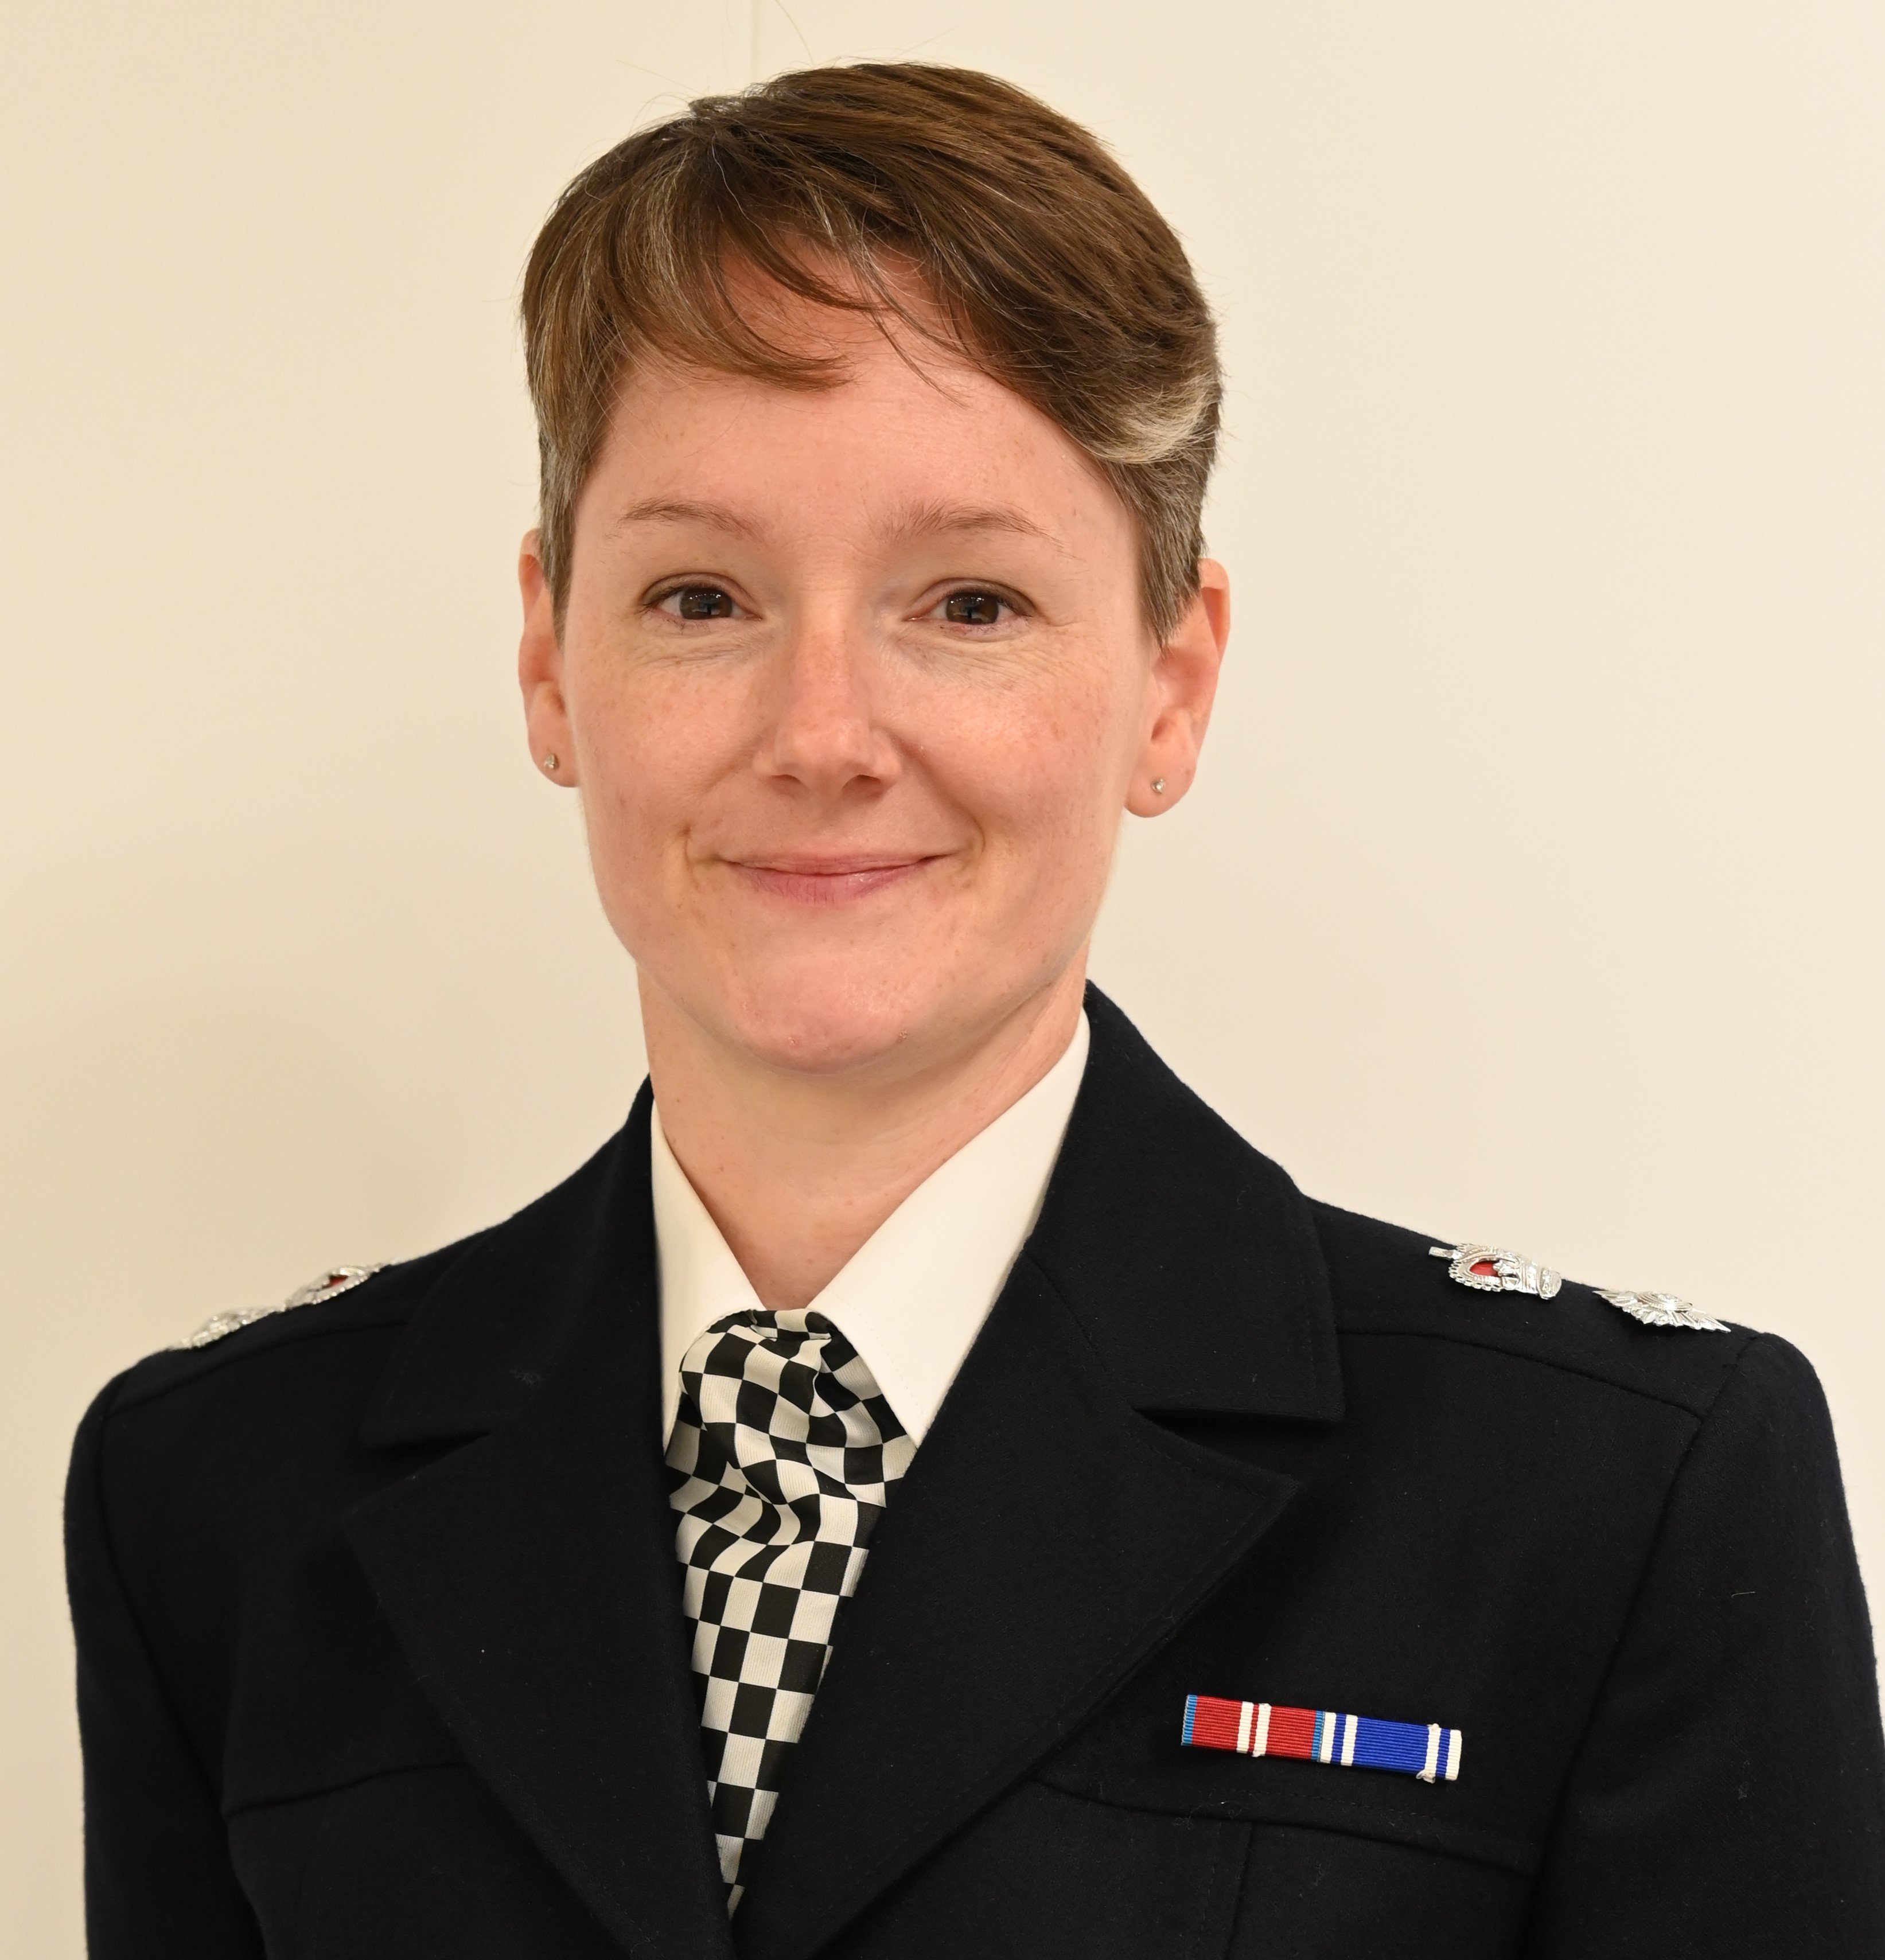 Chief Superintendent Claire Smart in uniform, smiling to camera.